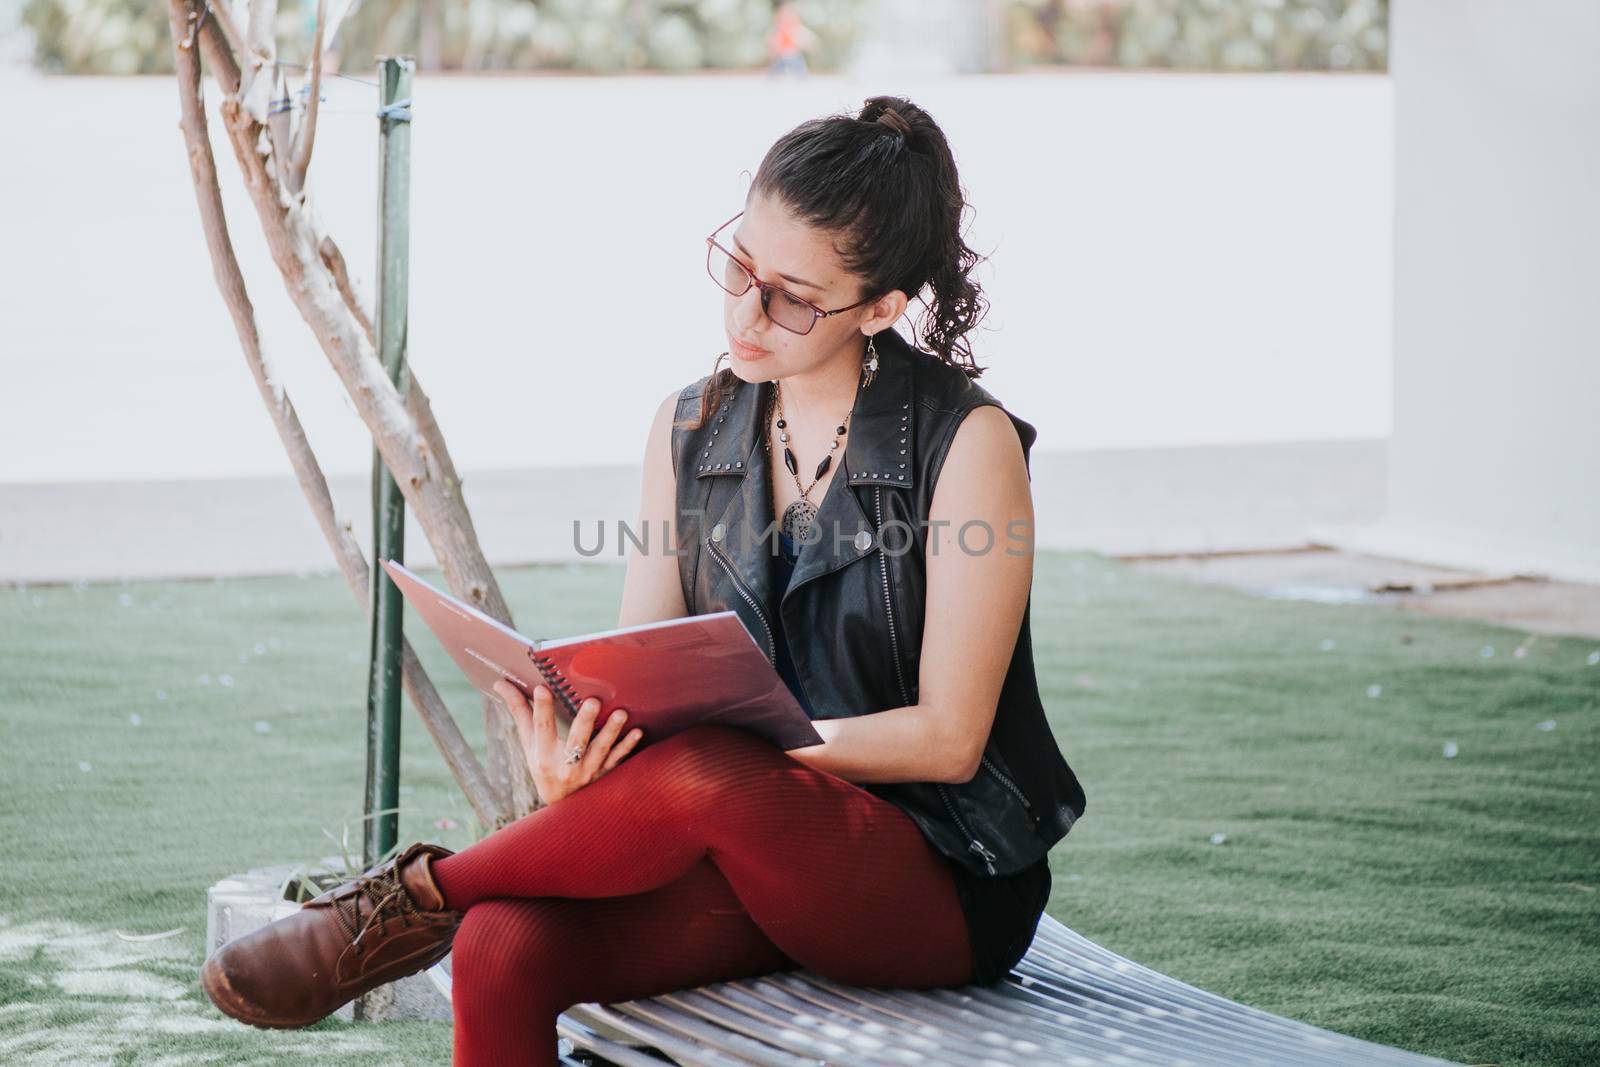 A student girl reading a book, urban girl sitting on a bench reading a book, Latin girl reading a book outside  by isaiphoto